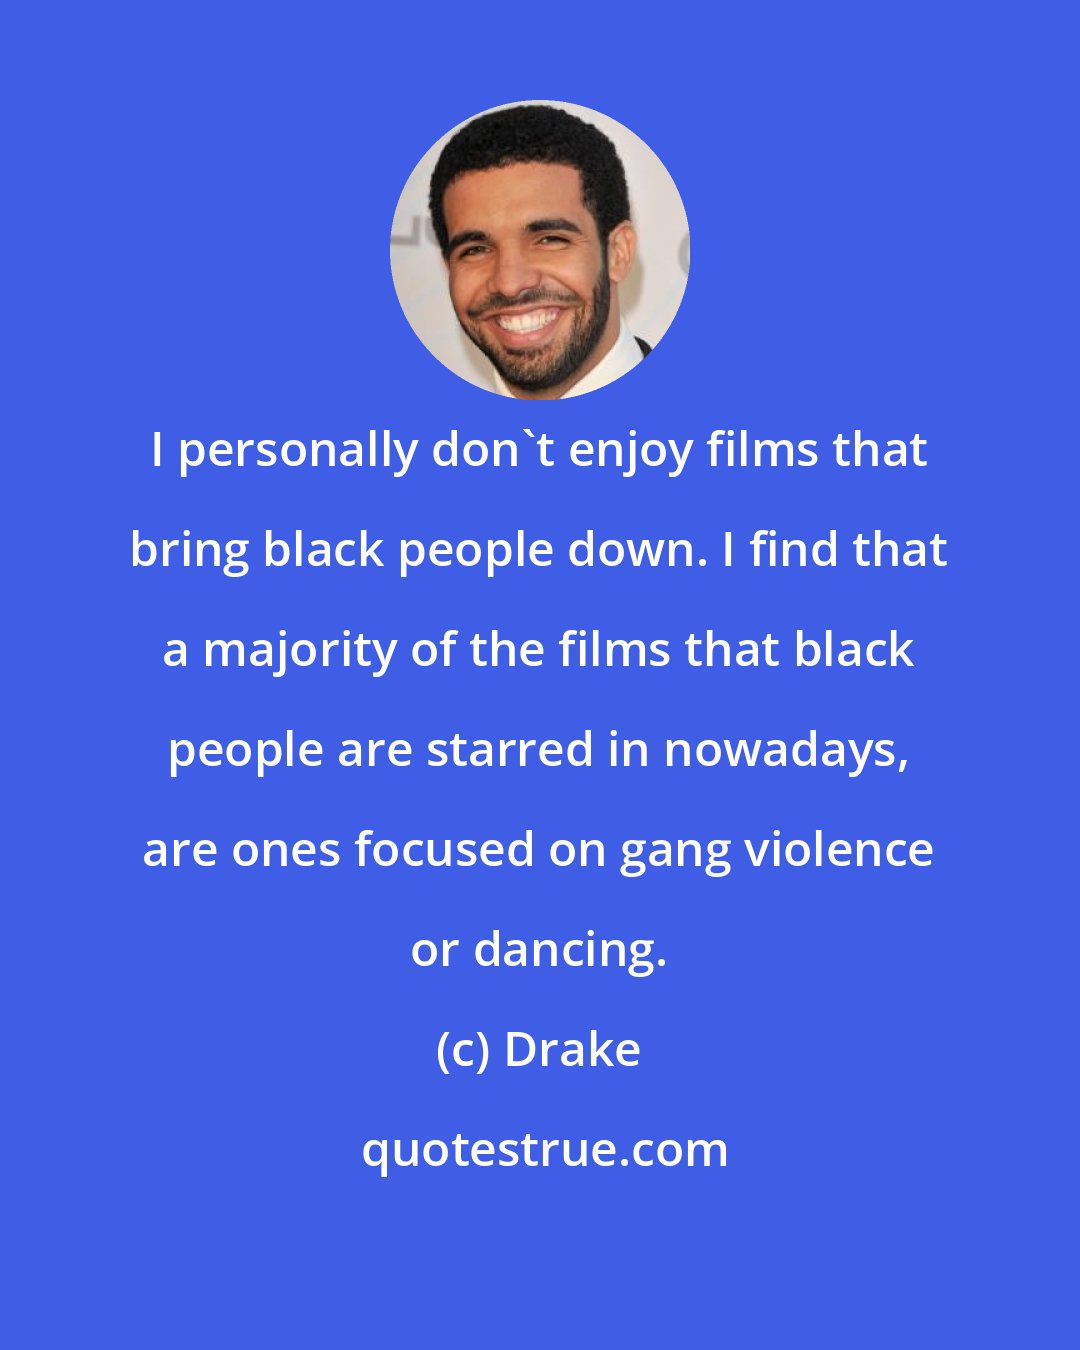 Drake: I personally don't enjoy films that bring black people down. I find that a majority of the films that black people are starred in nowadays, are ones focused on gang violence or dancing.